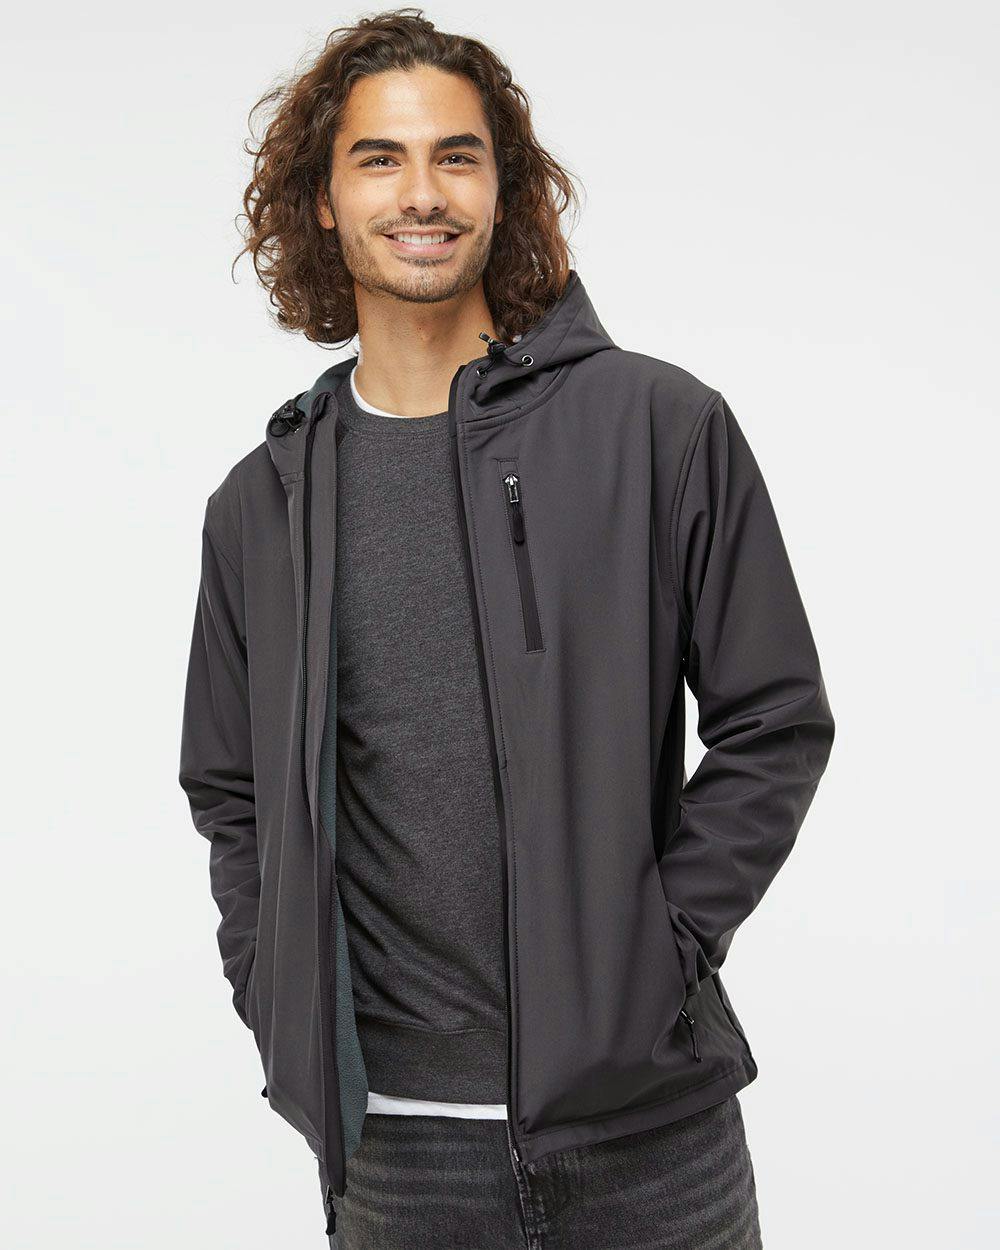 Image for Poly-Tech Soft Shell Jacket - EXP35SSZ